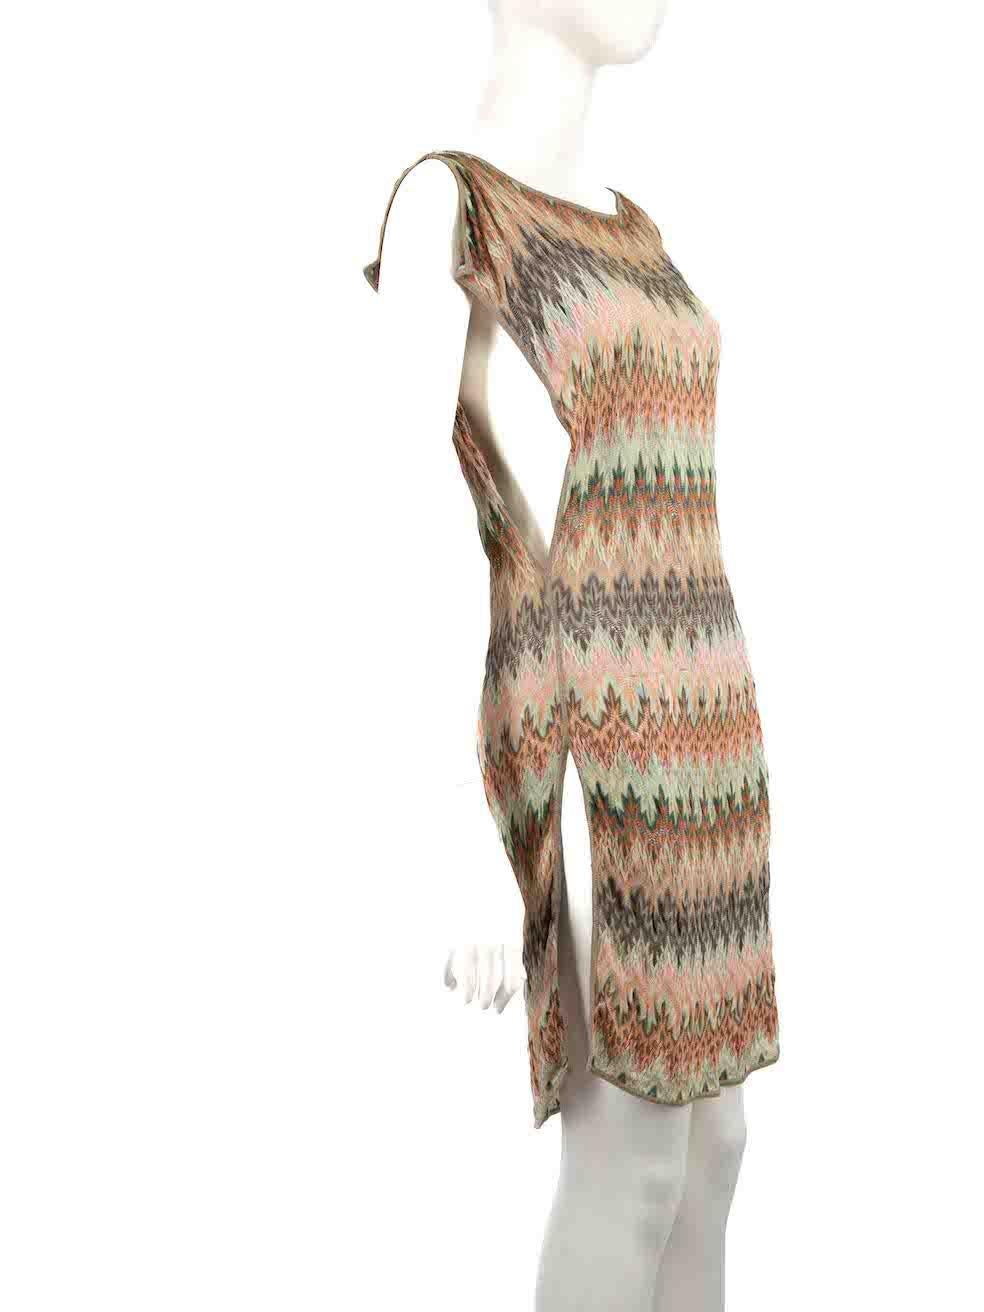 CONDITION is Very good. Hardly any visible wear to dress is evident on this used Missoni Mare designer resale item.
 
 
 Details
 Multicolour- green, orange, brown
 Viscose
 Crochet beach dress
 Sleeveless
 Abstract pattern
 Mini
 Sheer
 
 
 Made in